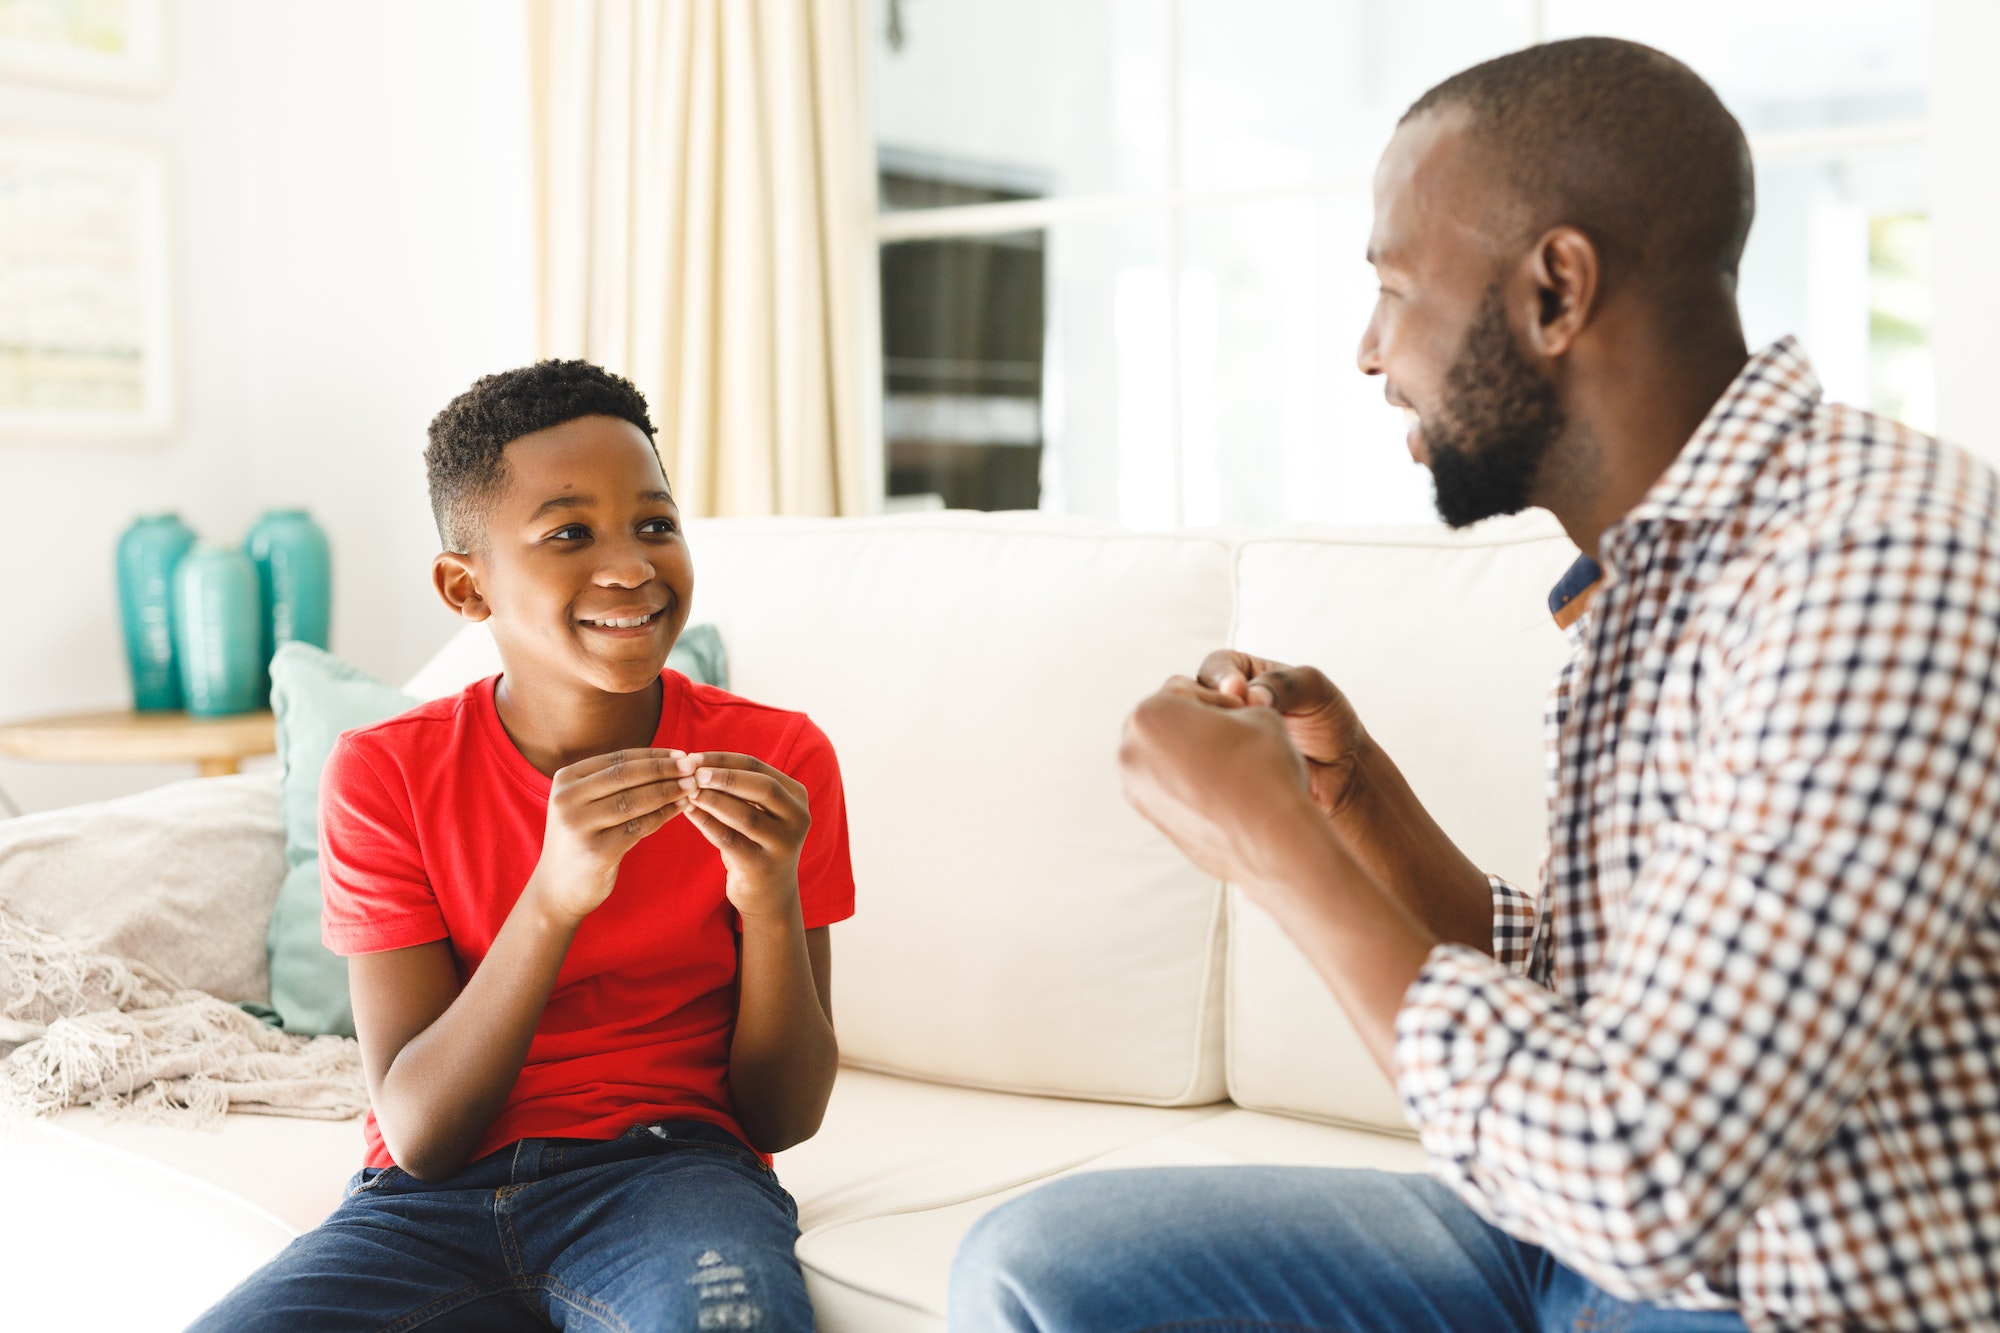 Happy african american father with son sitting on couch in living room talking sign language